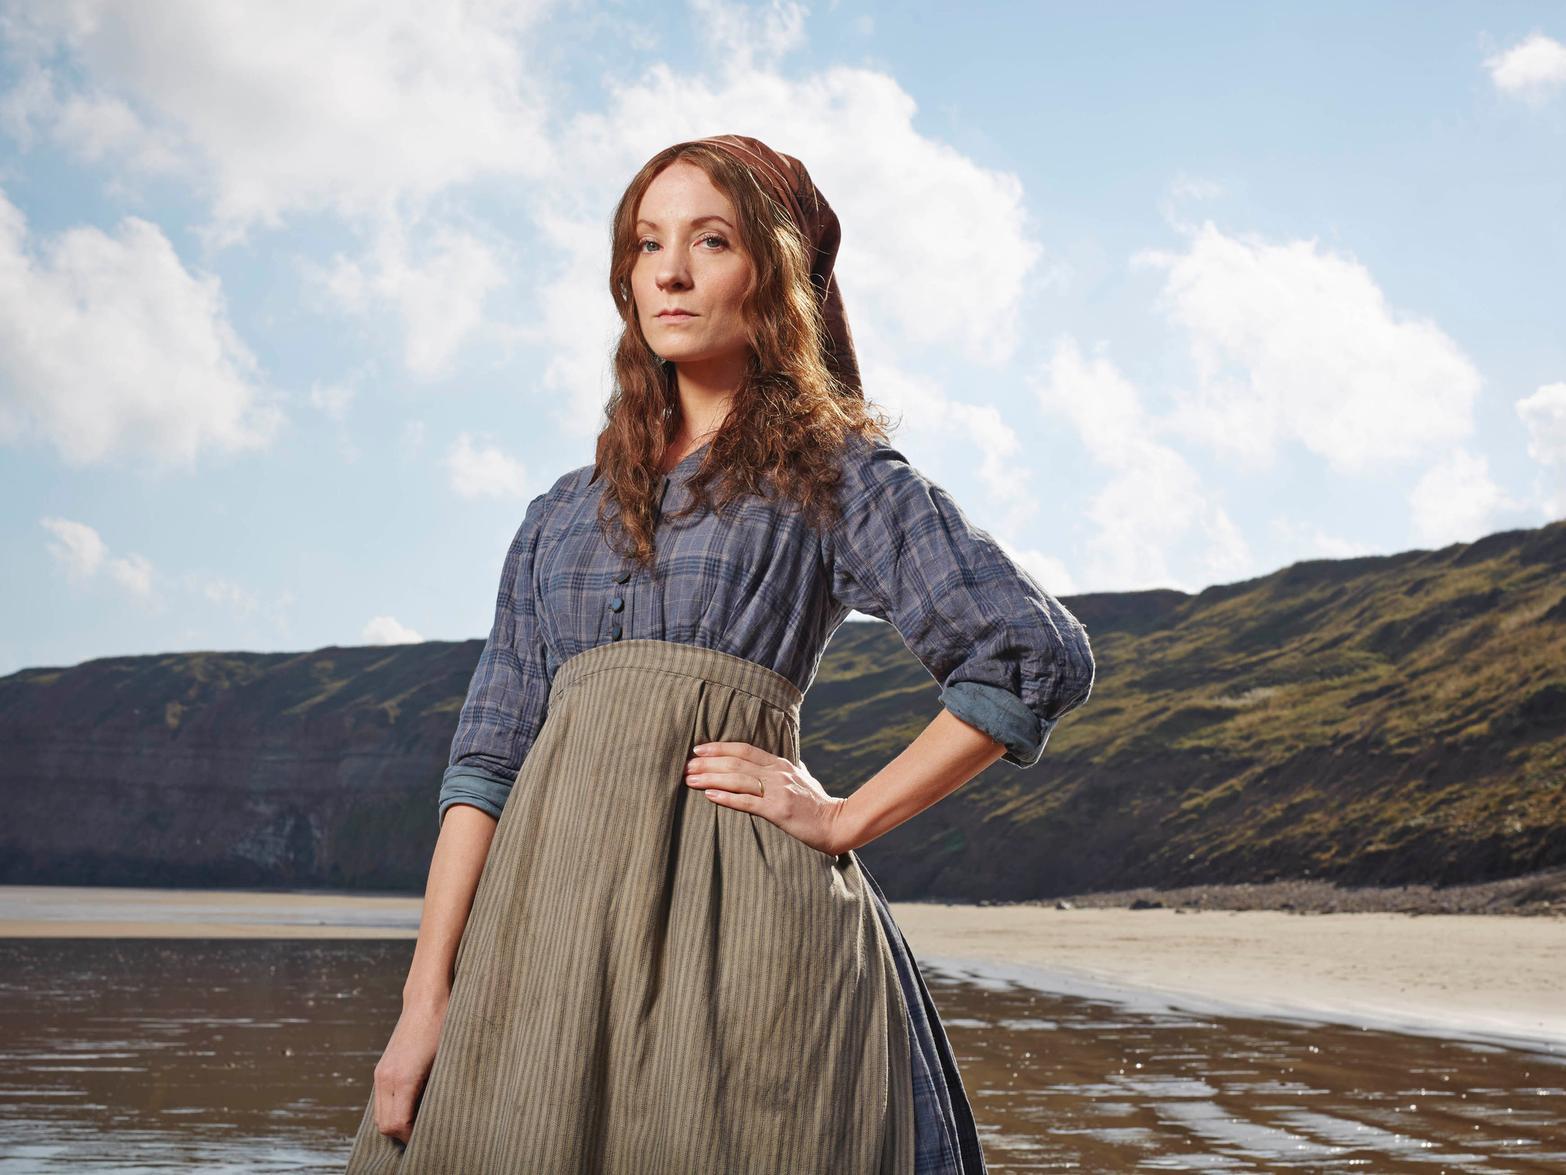 In 2016 she starred in ITV two-part drama as protagonist Mary Ann Cotton, widely regarded as Britain's first female serial killer.